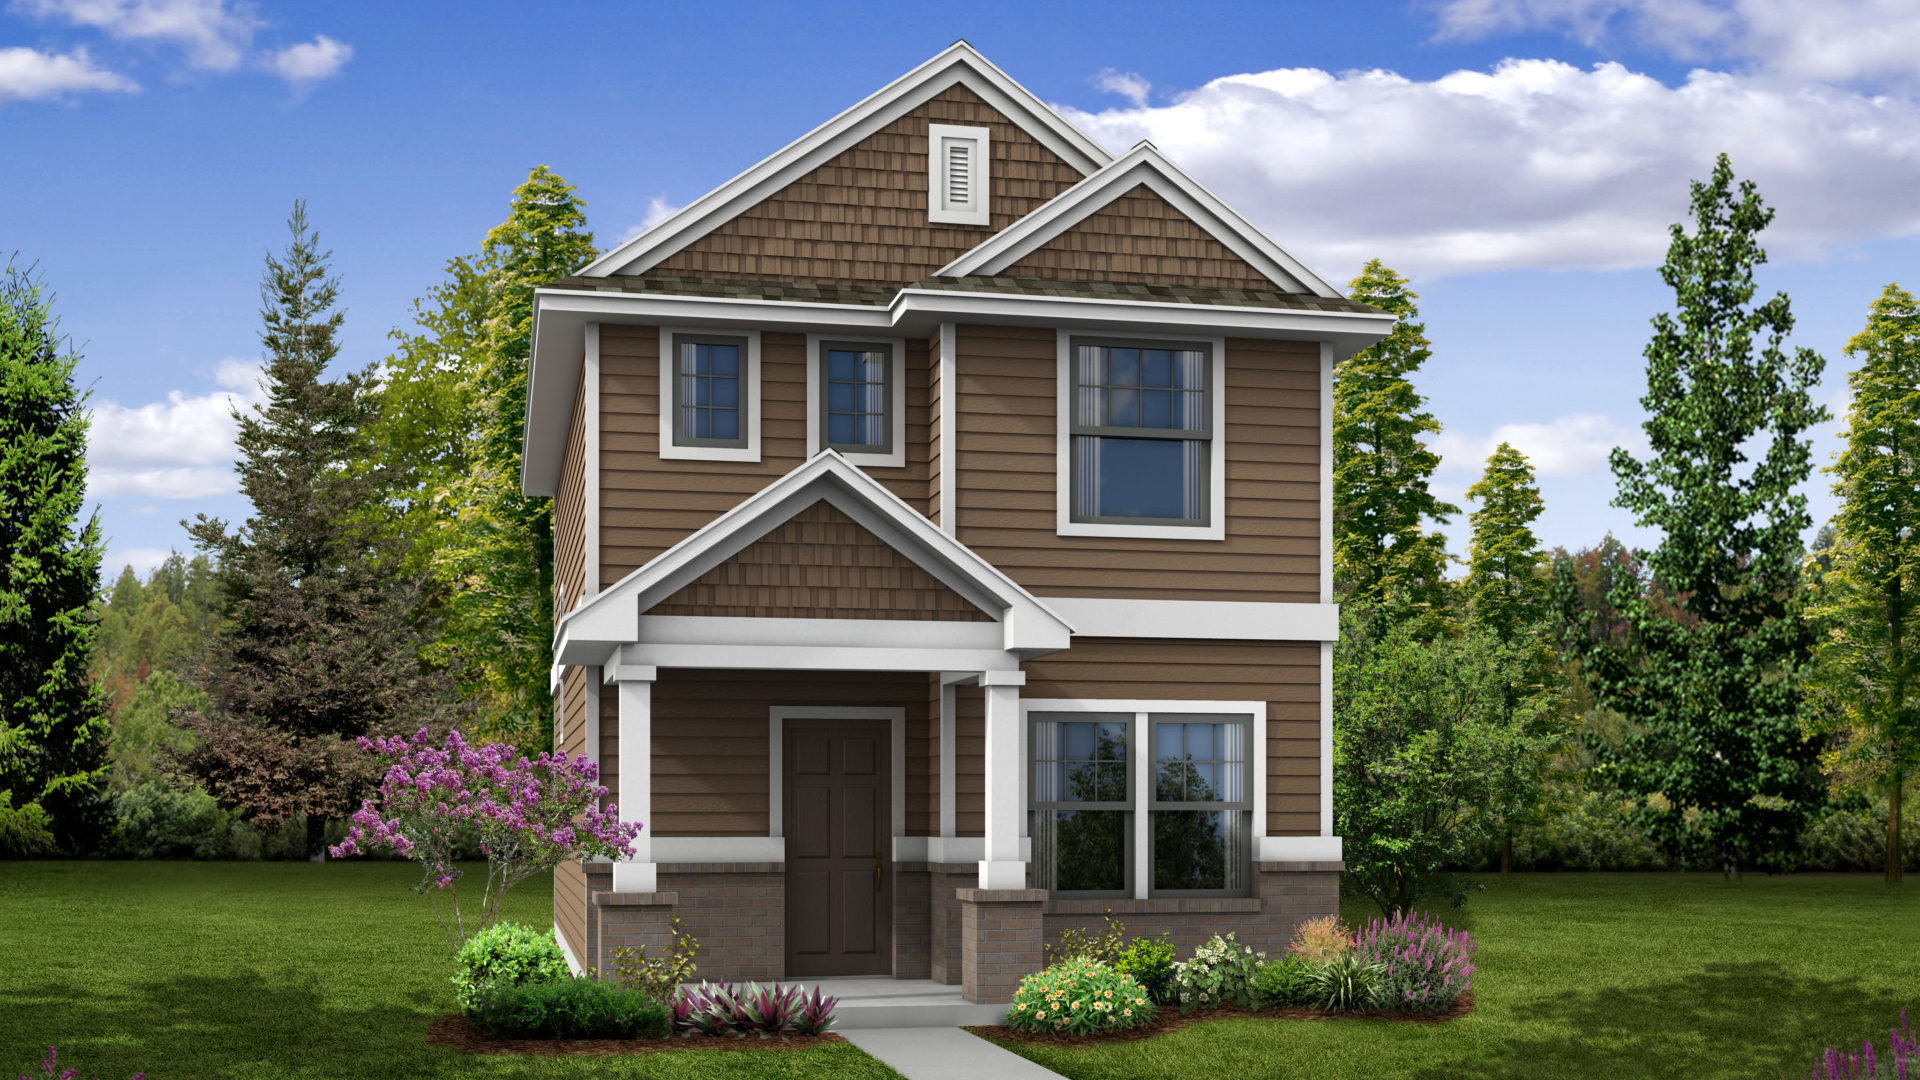 The Montgomery Elevation A Grande Estates - COMING 2022! New Homes in Bertram